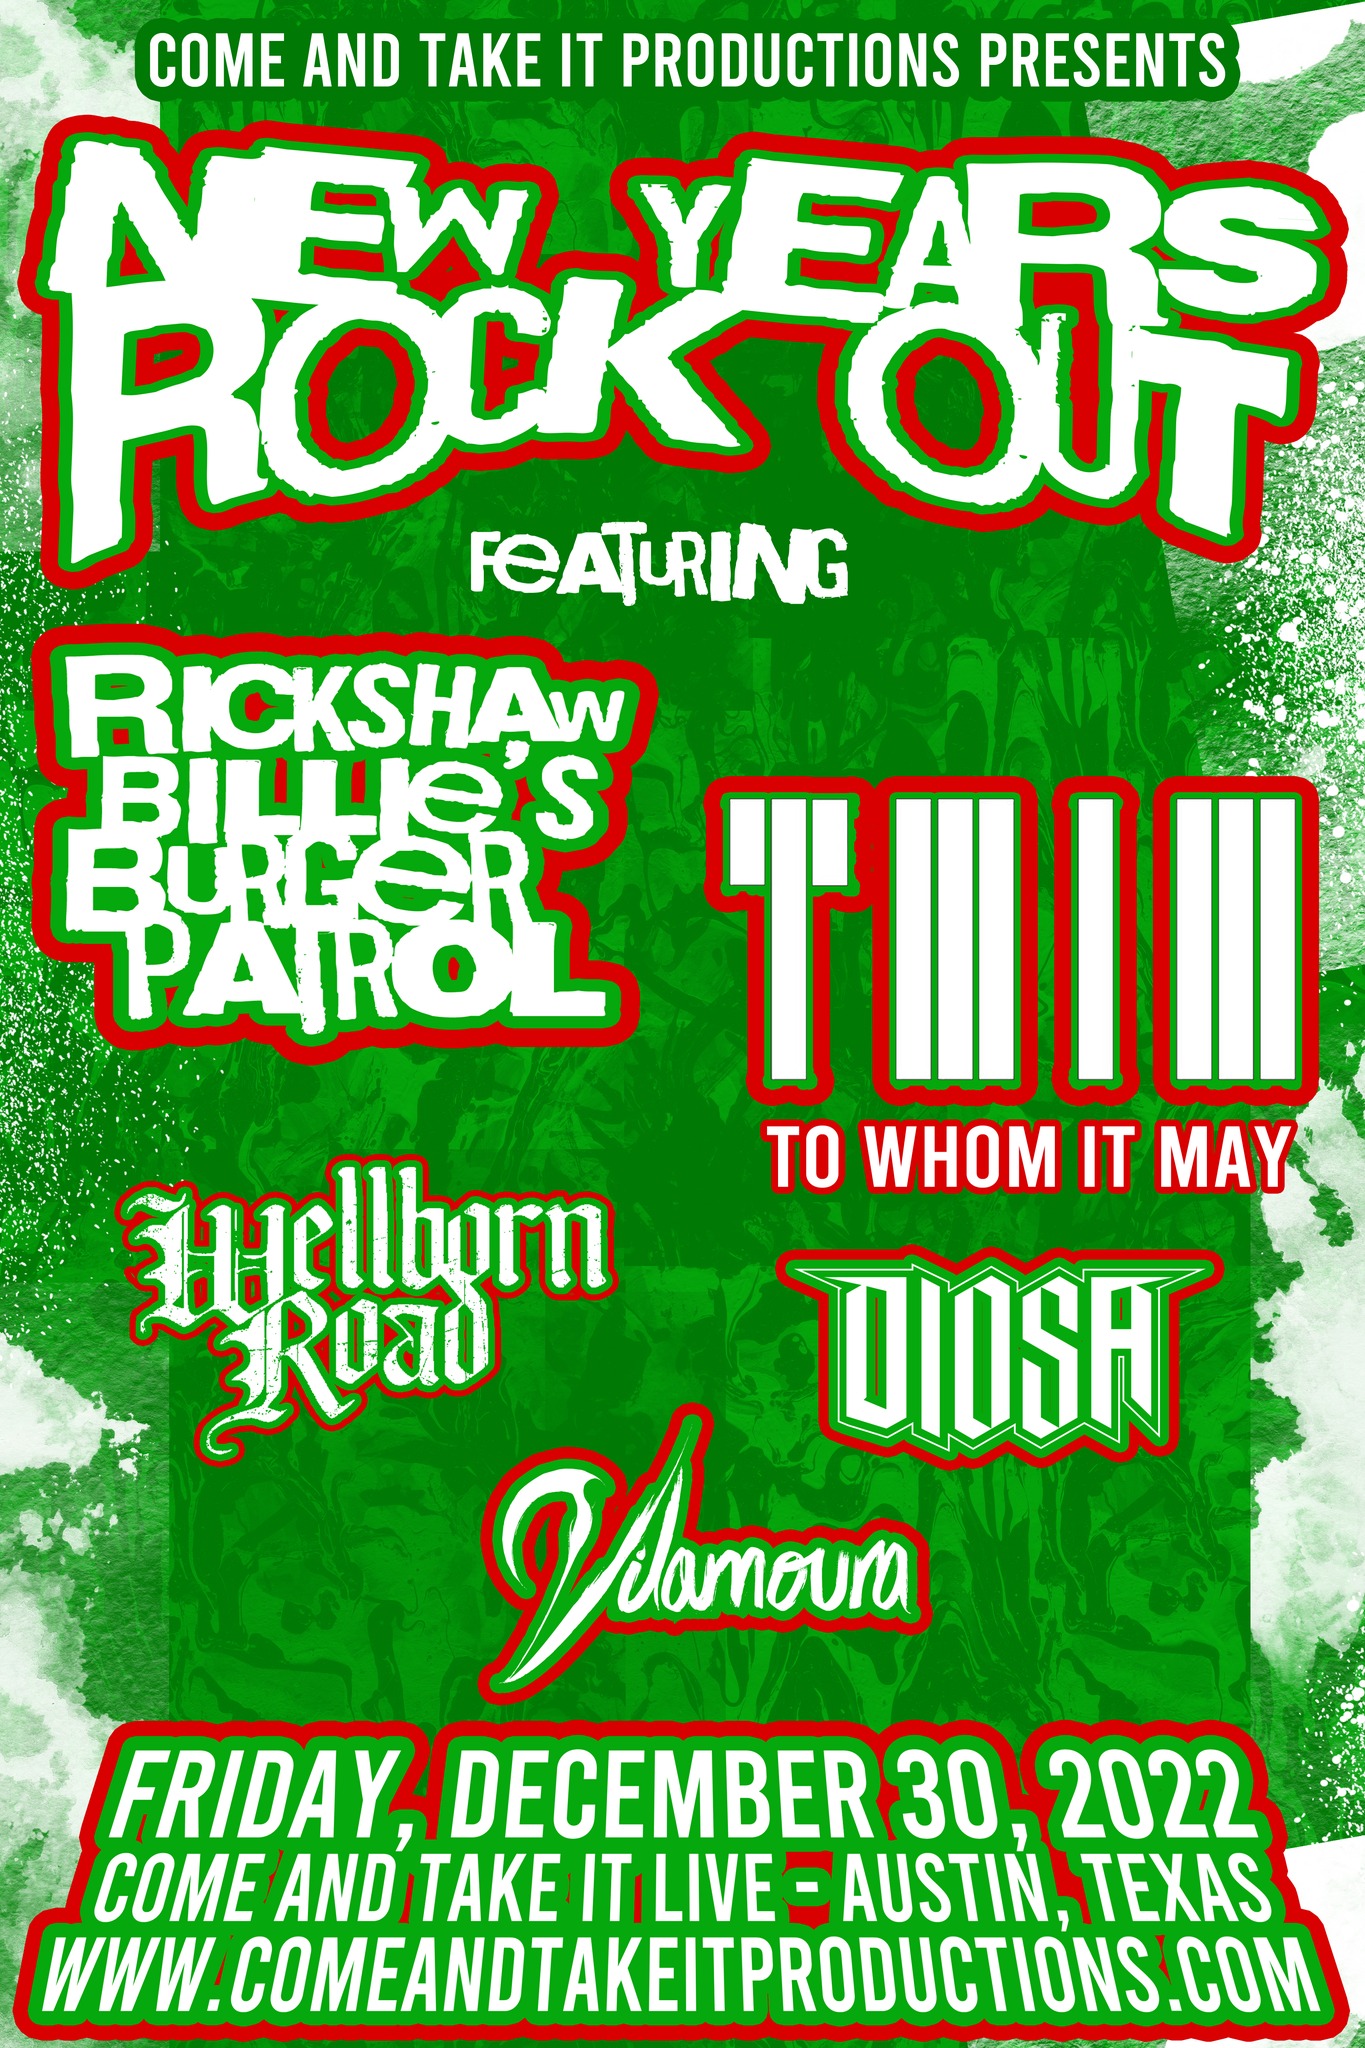 New Year's Rock Out featuring Rickshaw Billie's Burger Patrol, To Whom It May & More